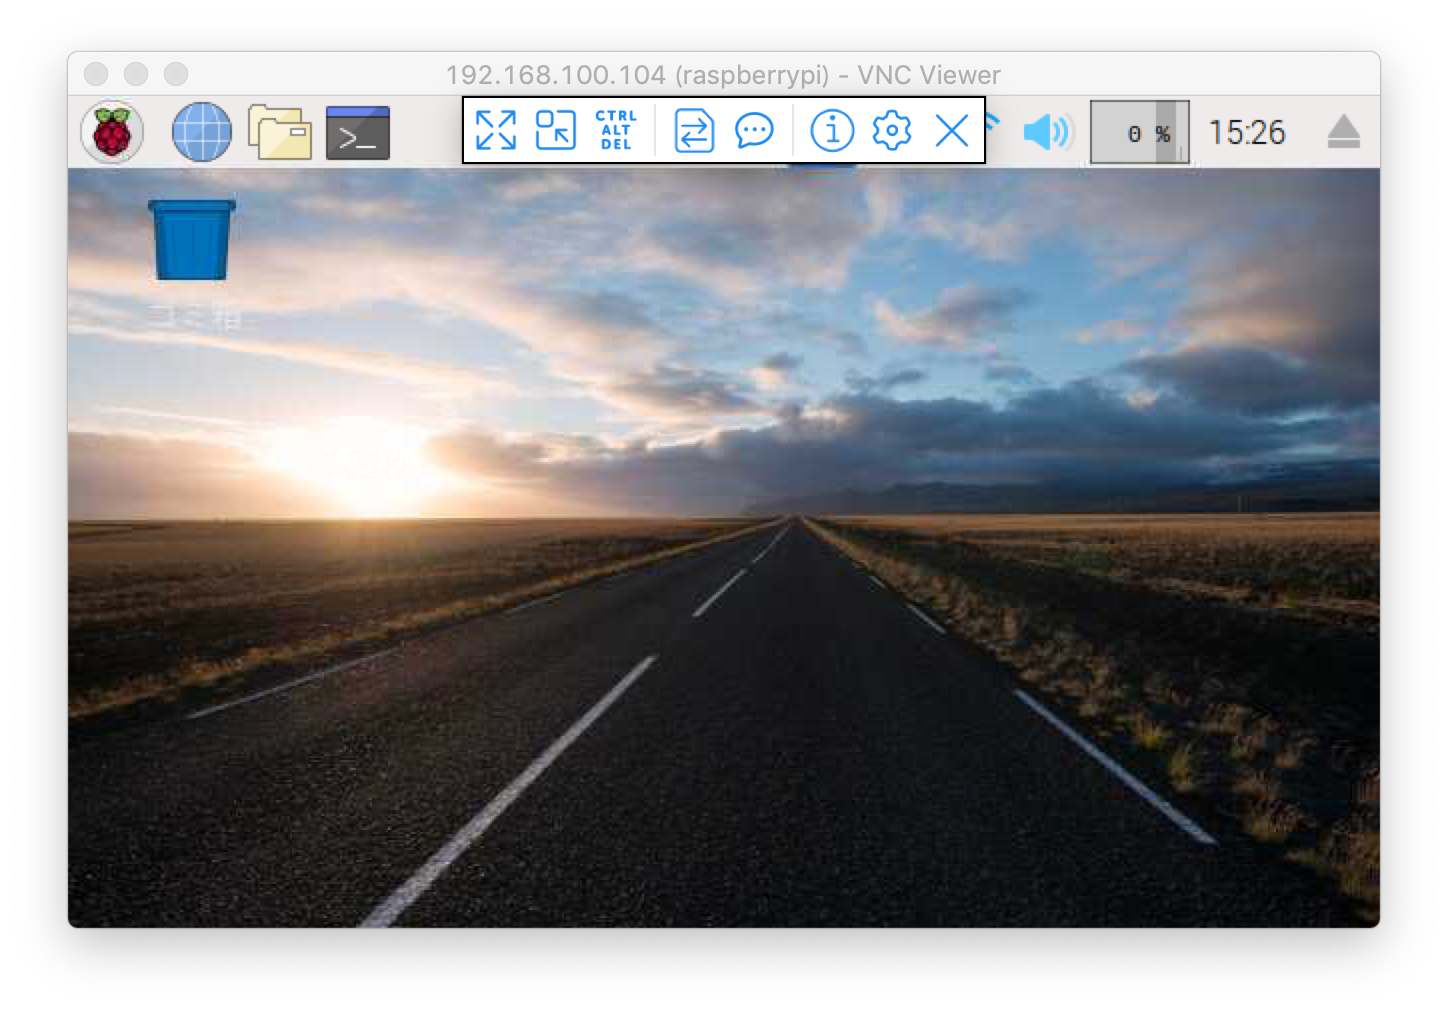 vnc_viewer5.png